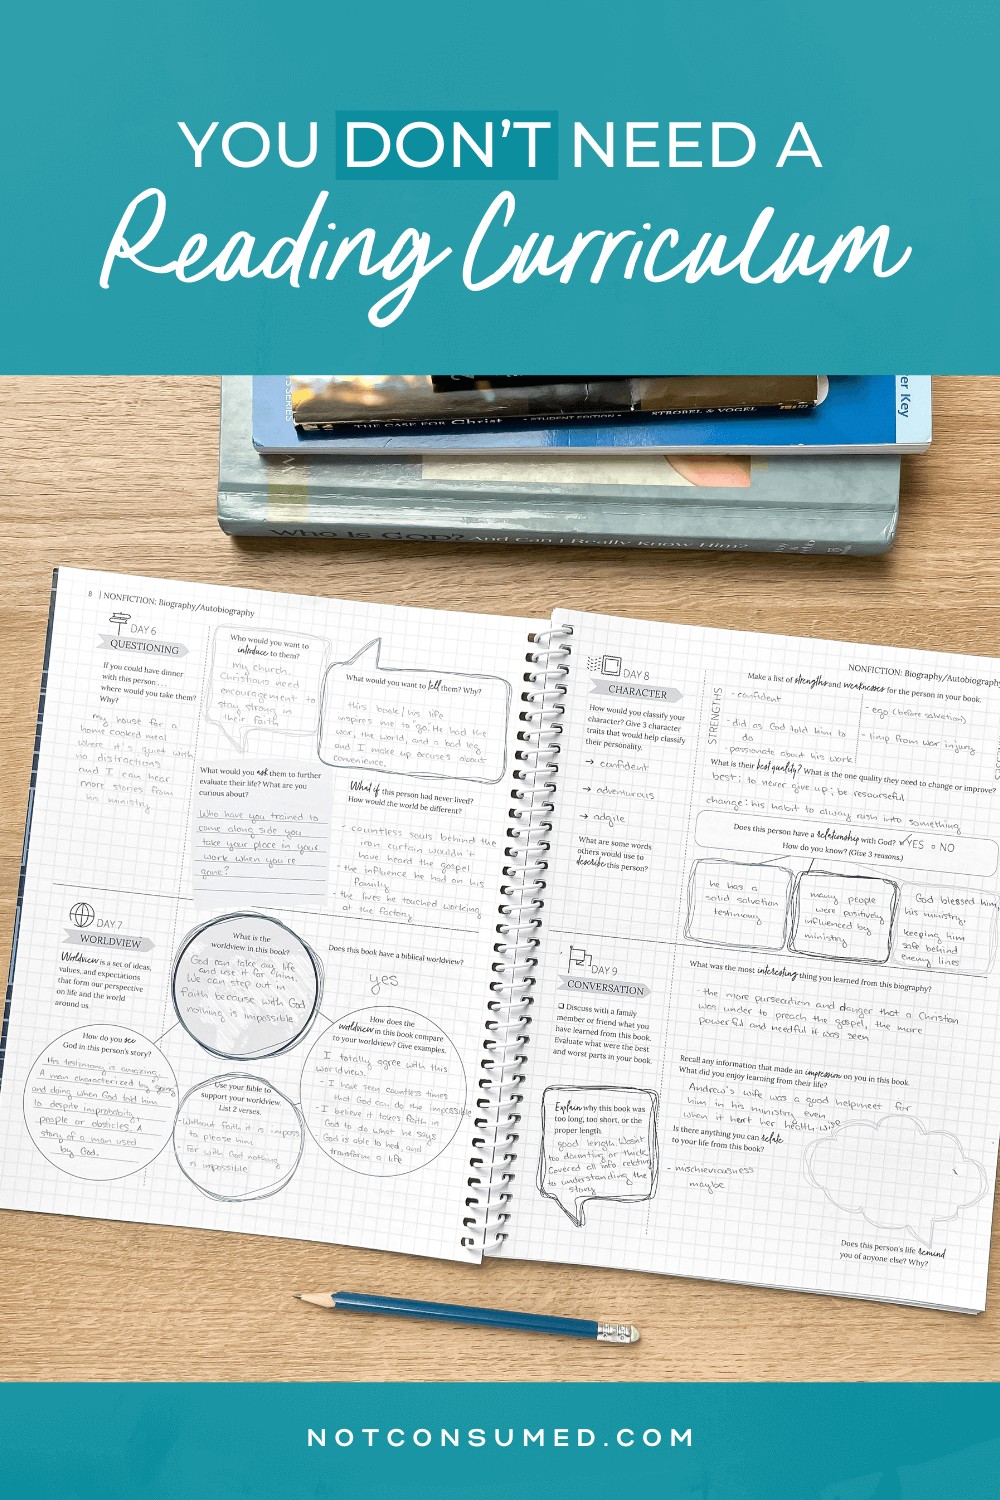 You Don't Need a Reading Curriculum